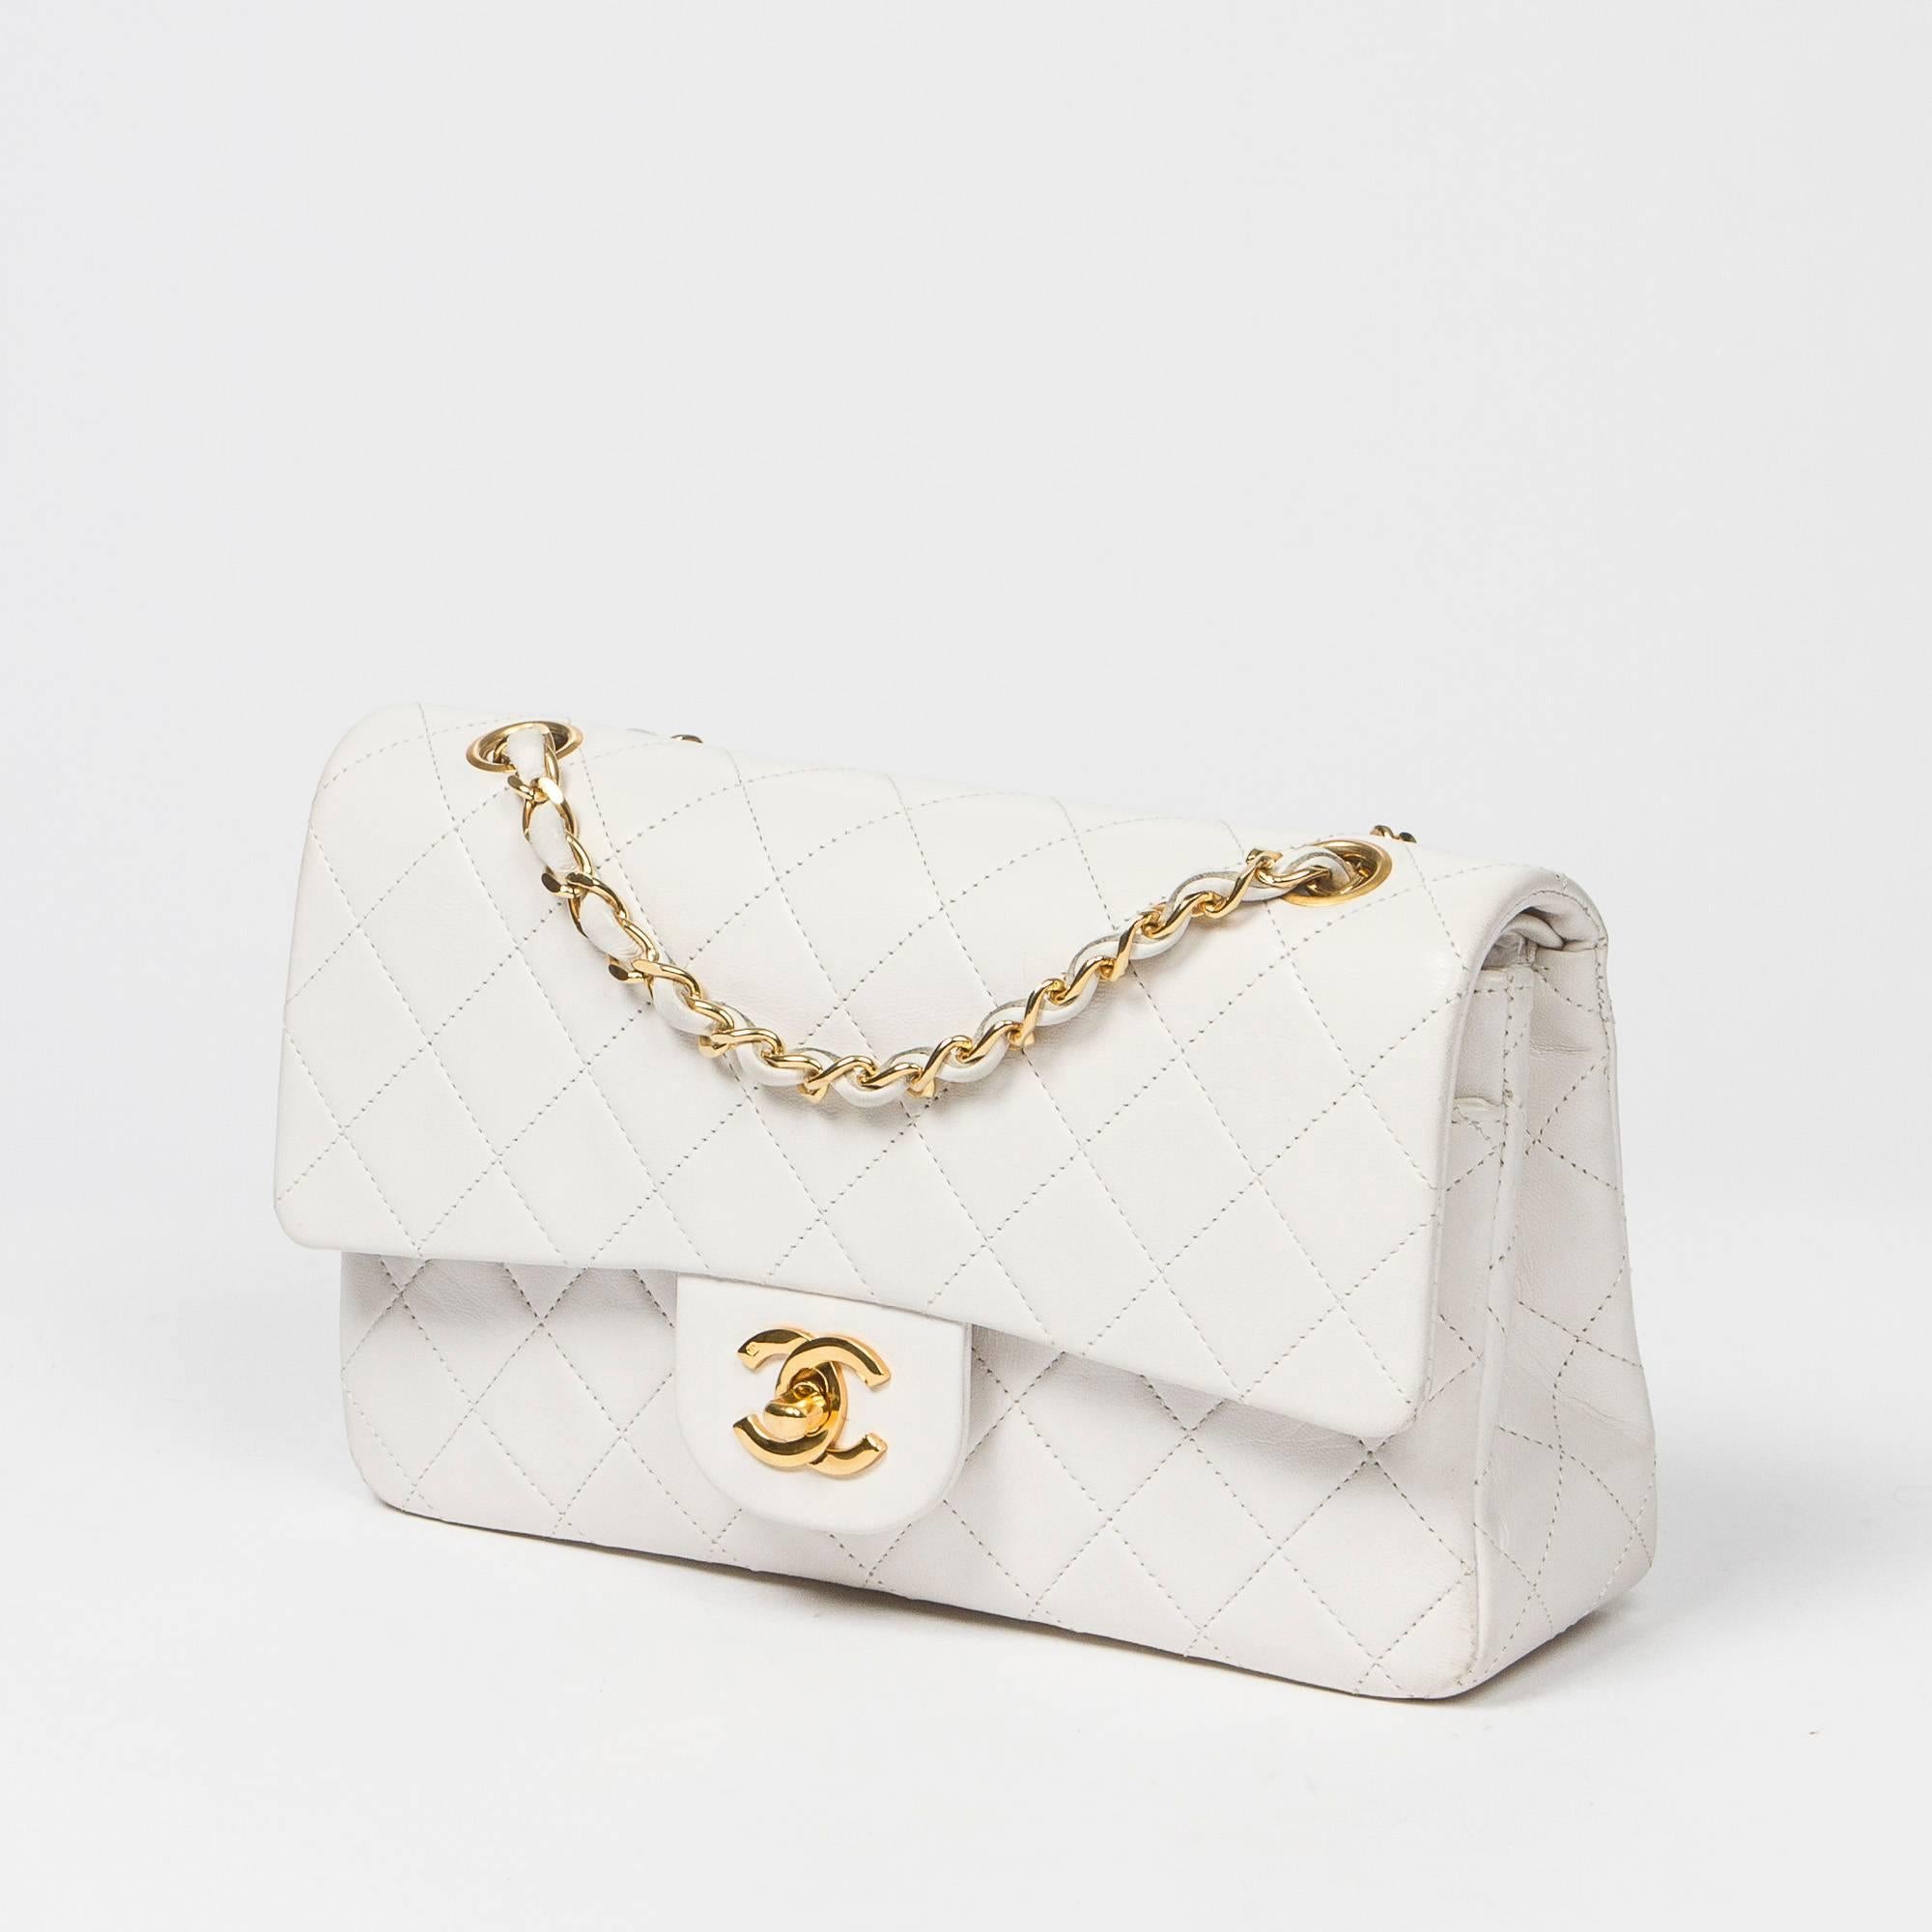 Classic Double Flap in white quilted calf leather, double chain strap interlaced with leather, signature turnlock closure, gold tone hardware. Back slip pocket. White leather lined interior with 3 slip pockets. Gold tone heat stamp 